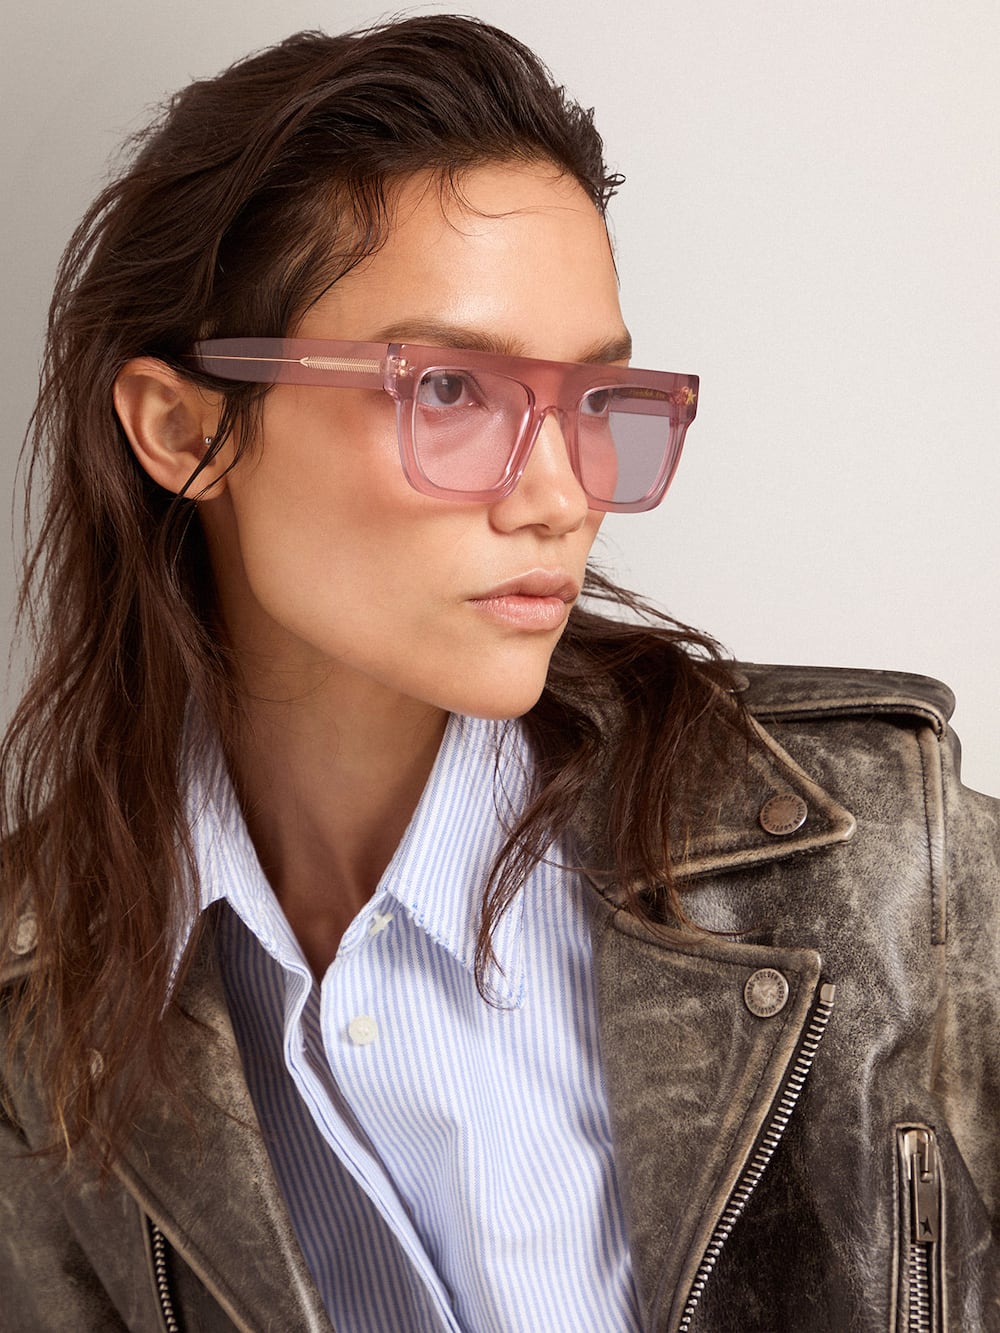 Golden Goose - Square-style Sunframe Jamie with clear pink frame and pink lenses in 